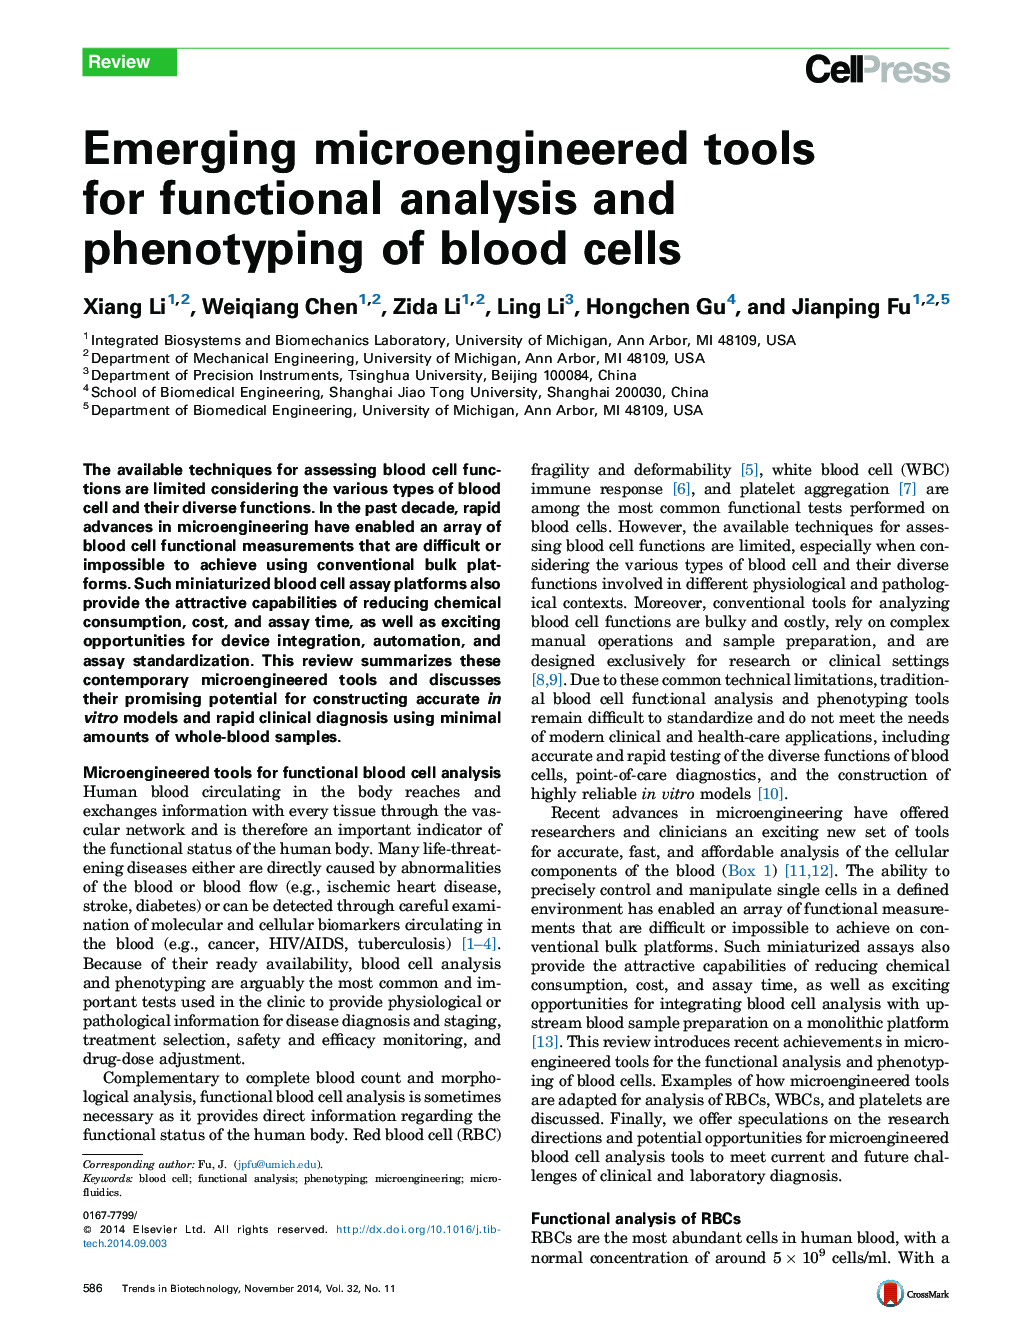 Emerging microengineered tools for functional analysis and phenotyping of blood cells